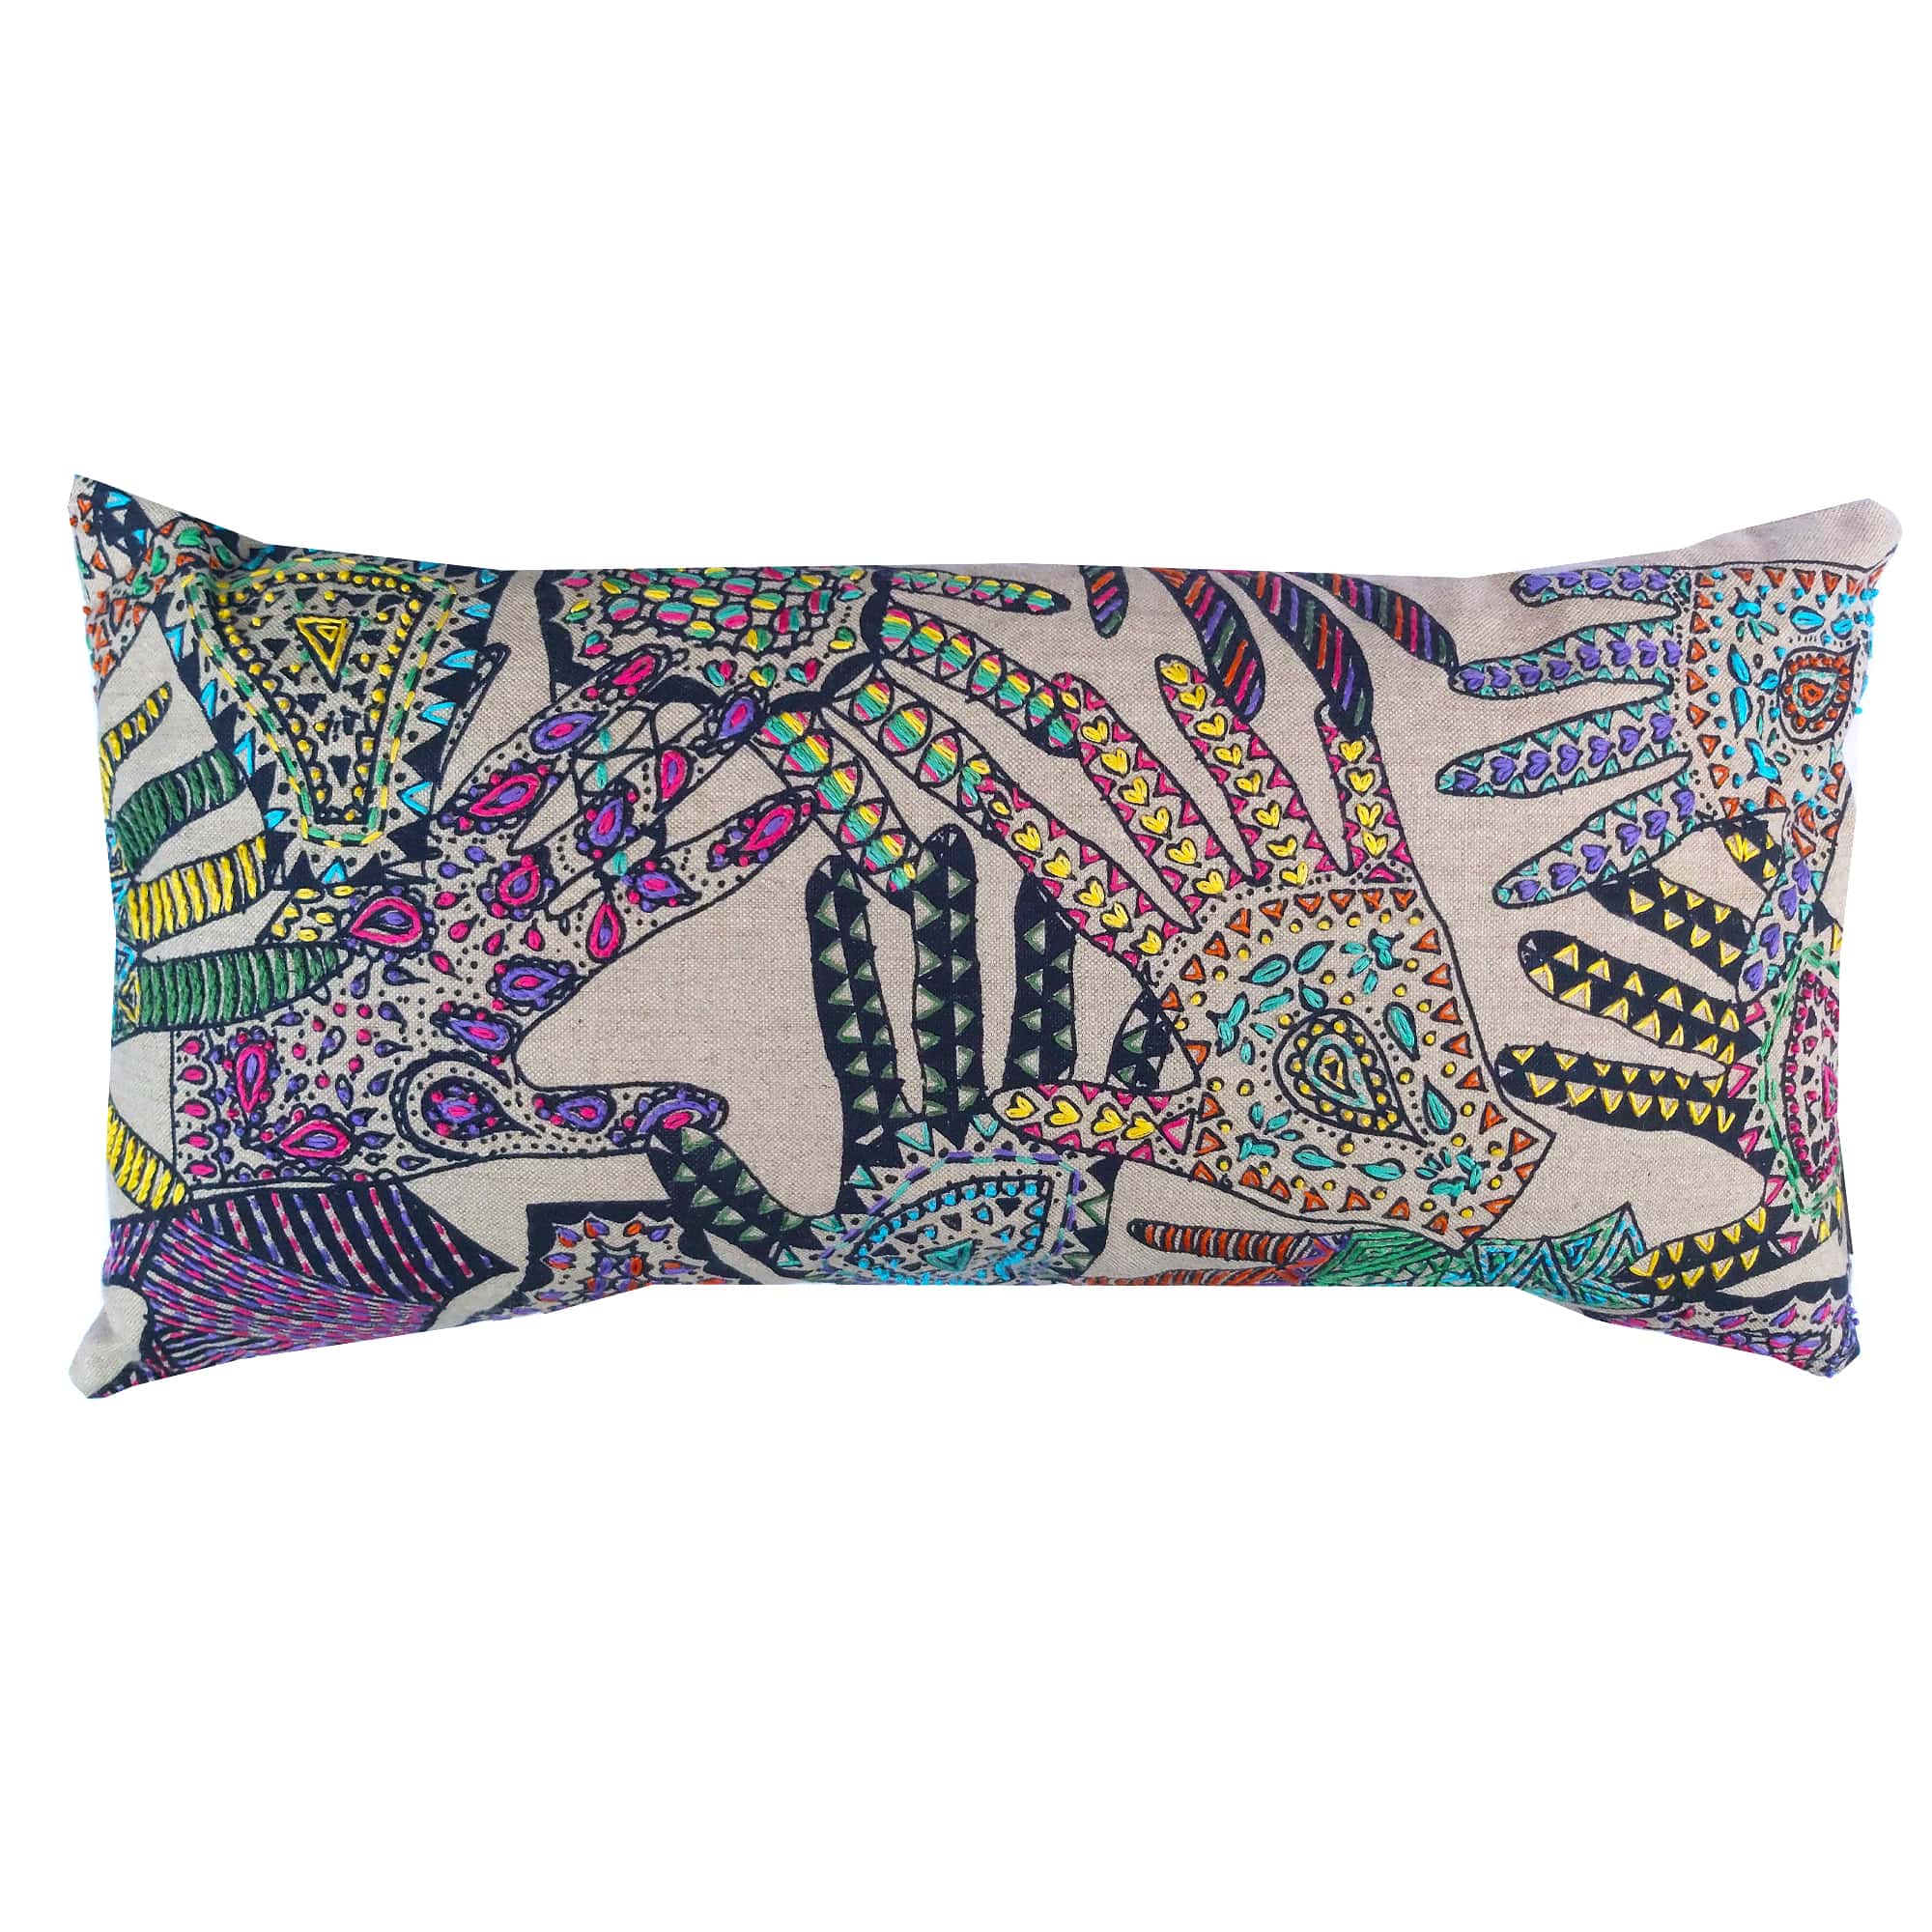 London College of Fashion Embroidered Hands Cushion Bright